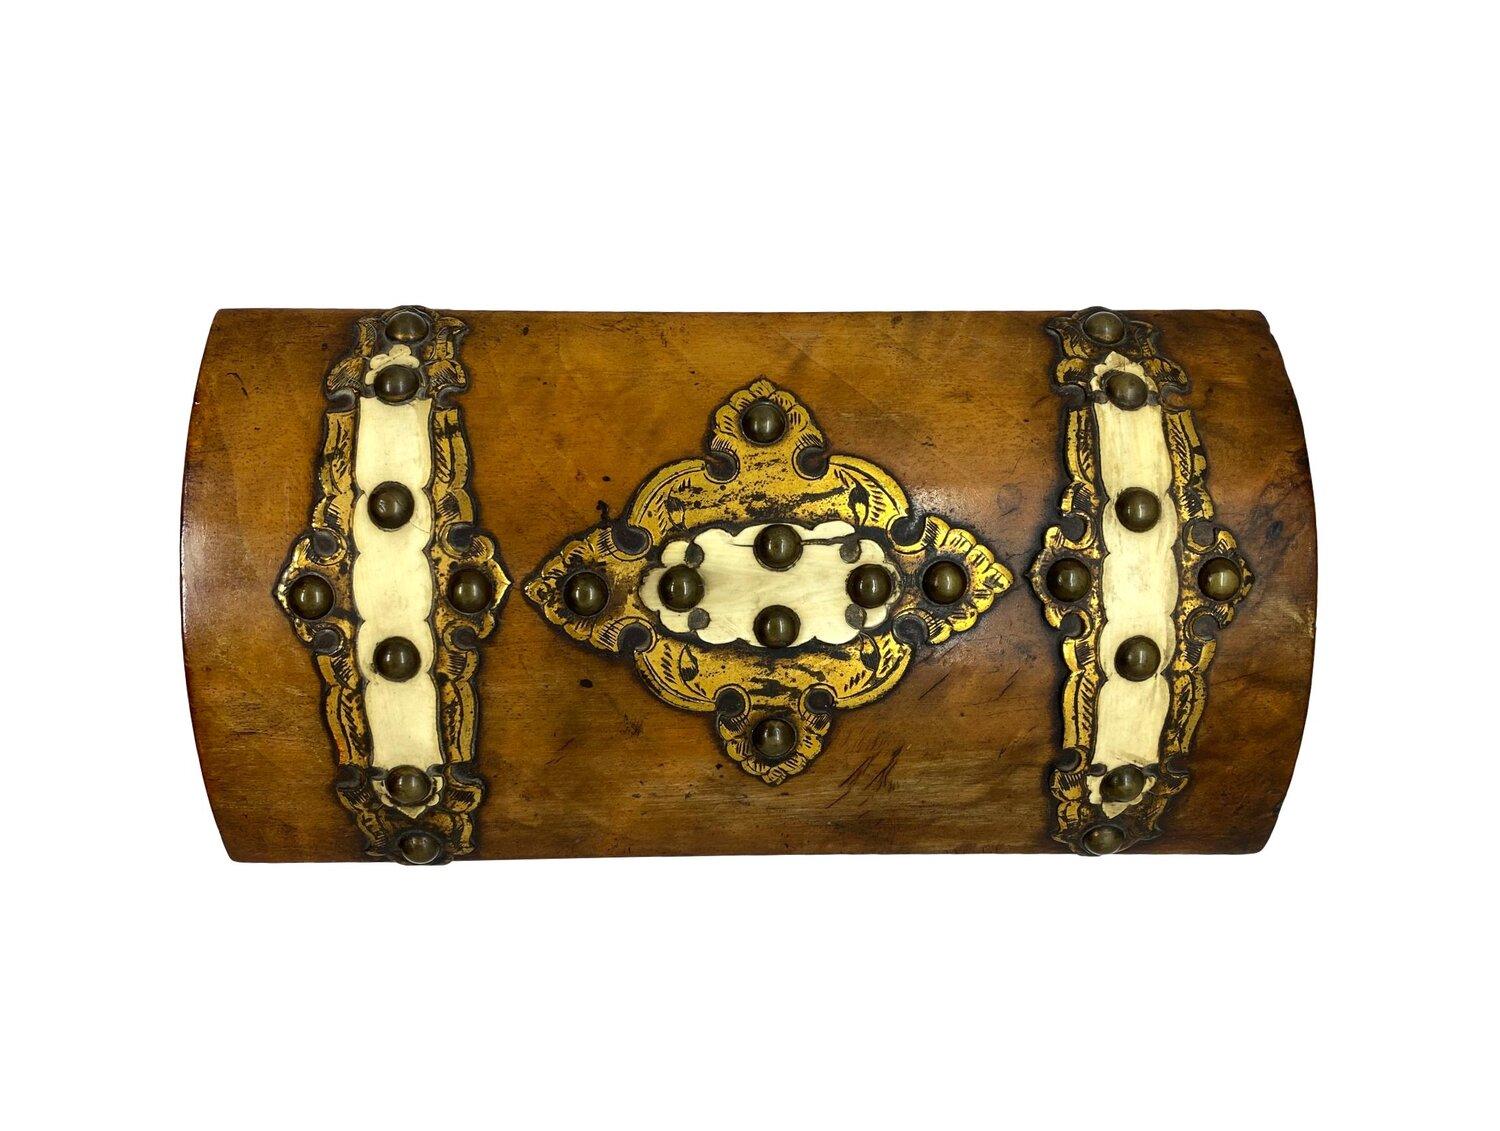 Walnut dome top tea caddy with brass and bone decoration, English, circa 1870

Dimensions: W 9”, D 4.75”, H 4.5”.